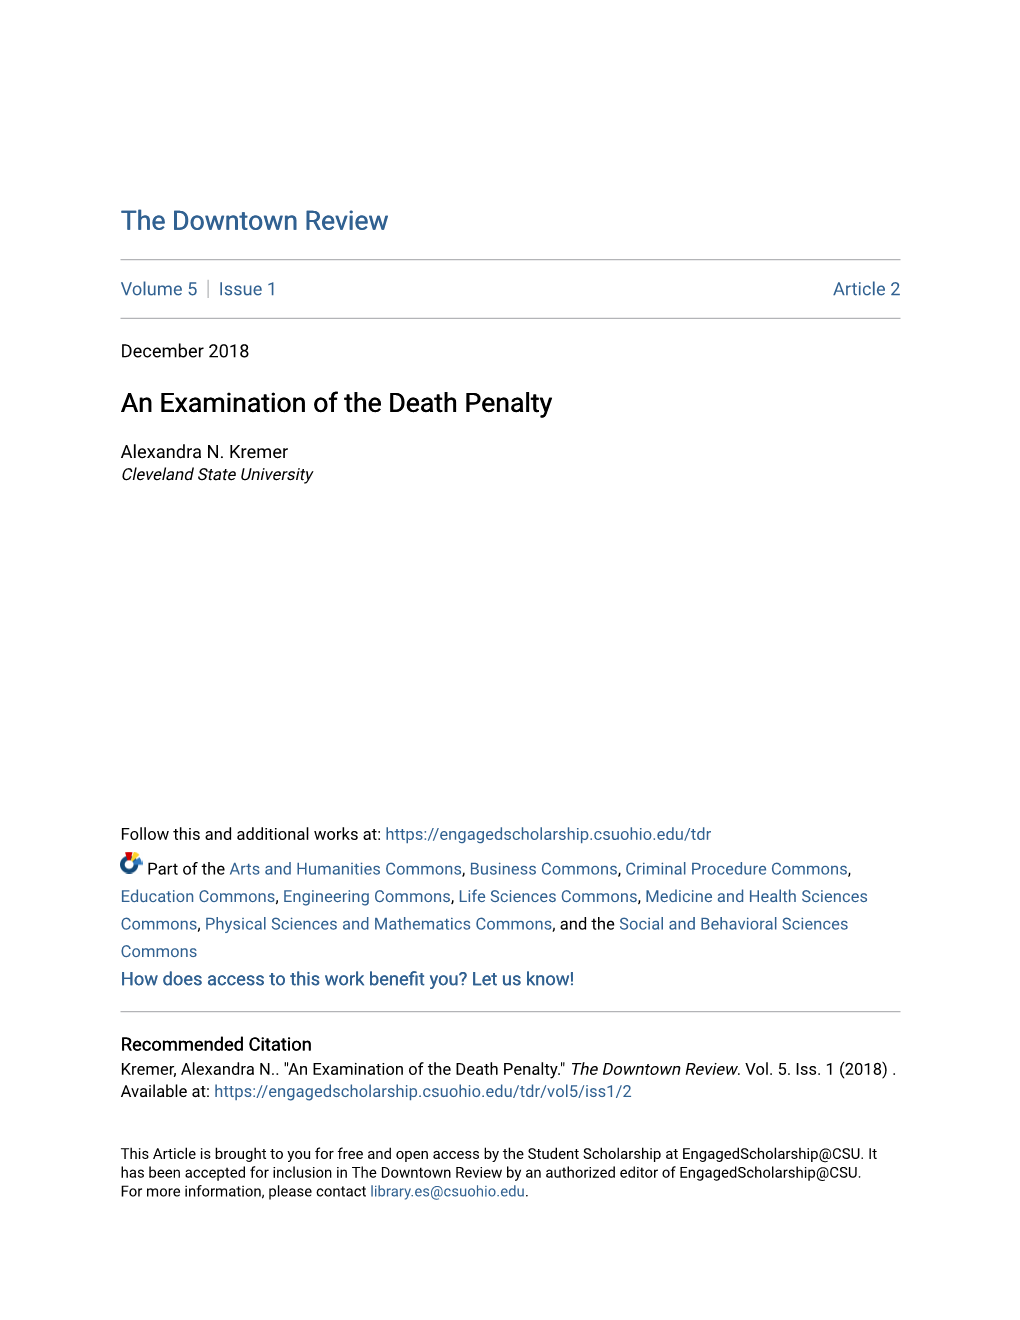 An Examination of the Death Penalty